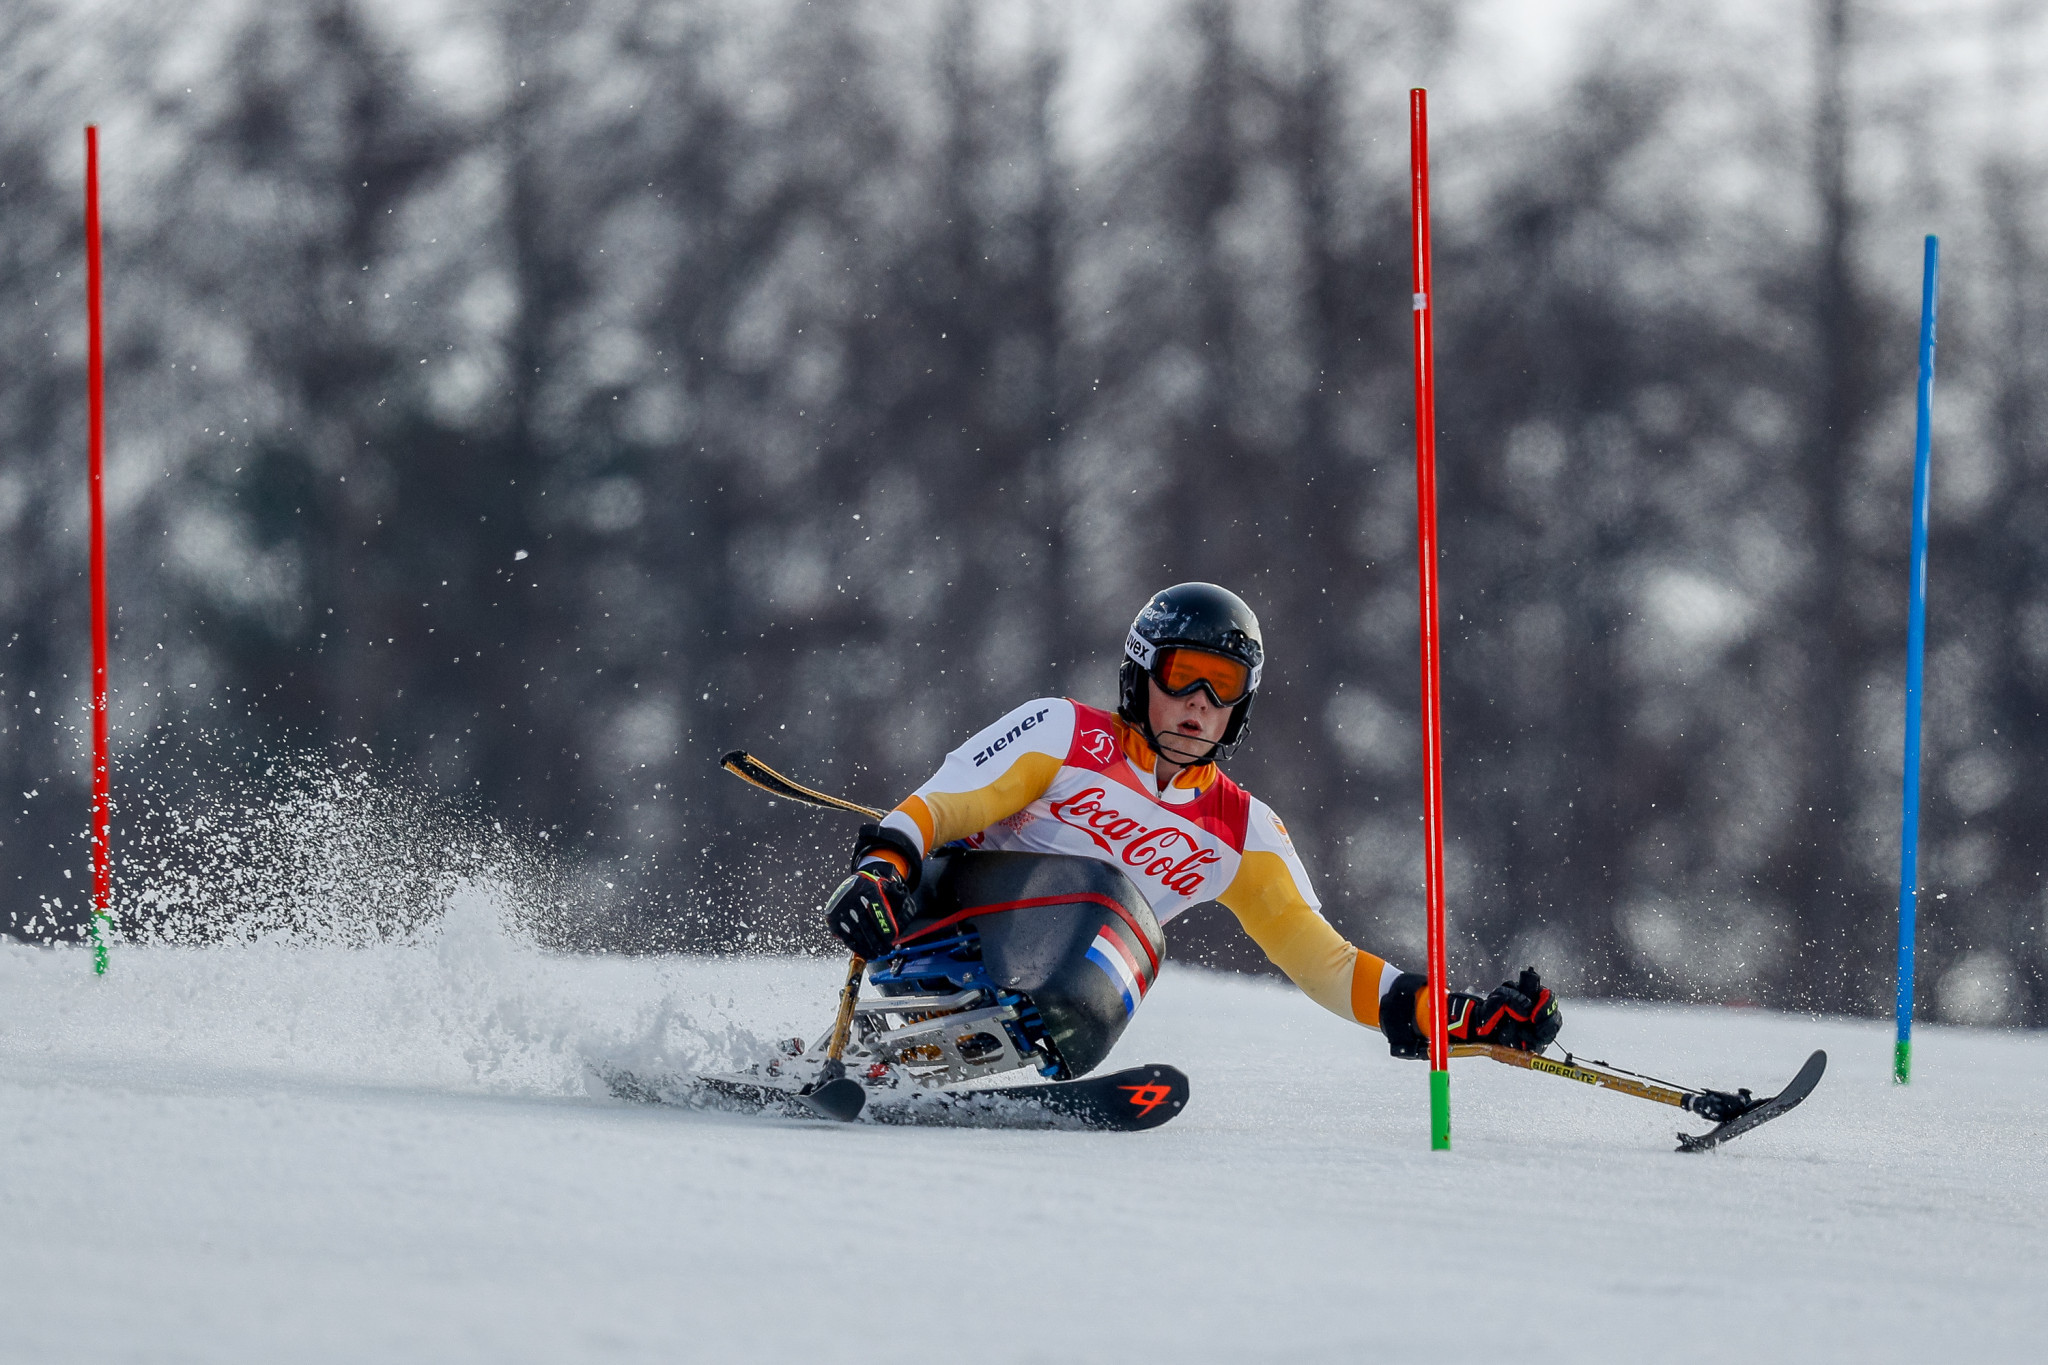 Kampschreur defends giant slalom title on opening day of World Para Alpine Skiing Championships